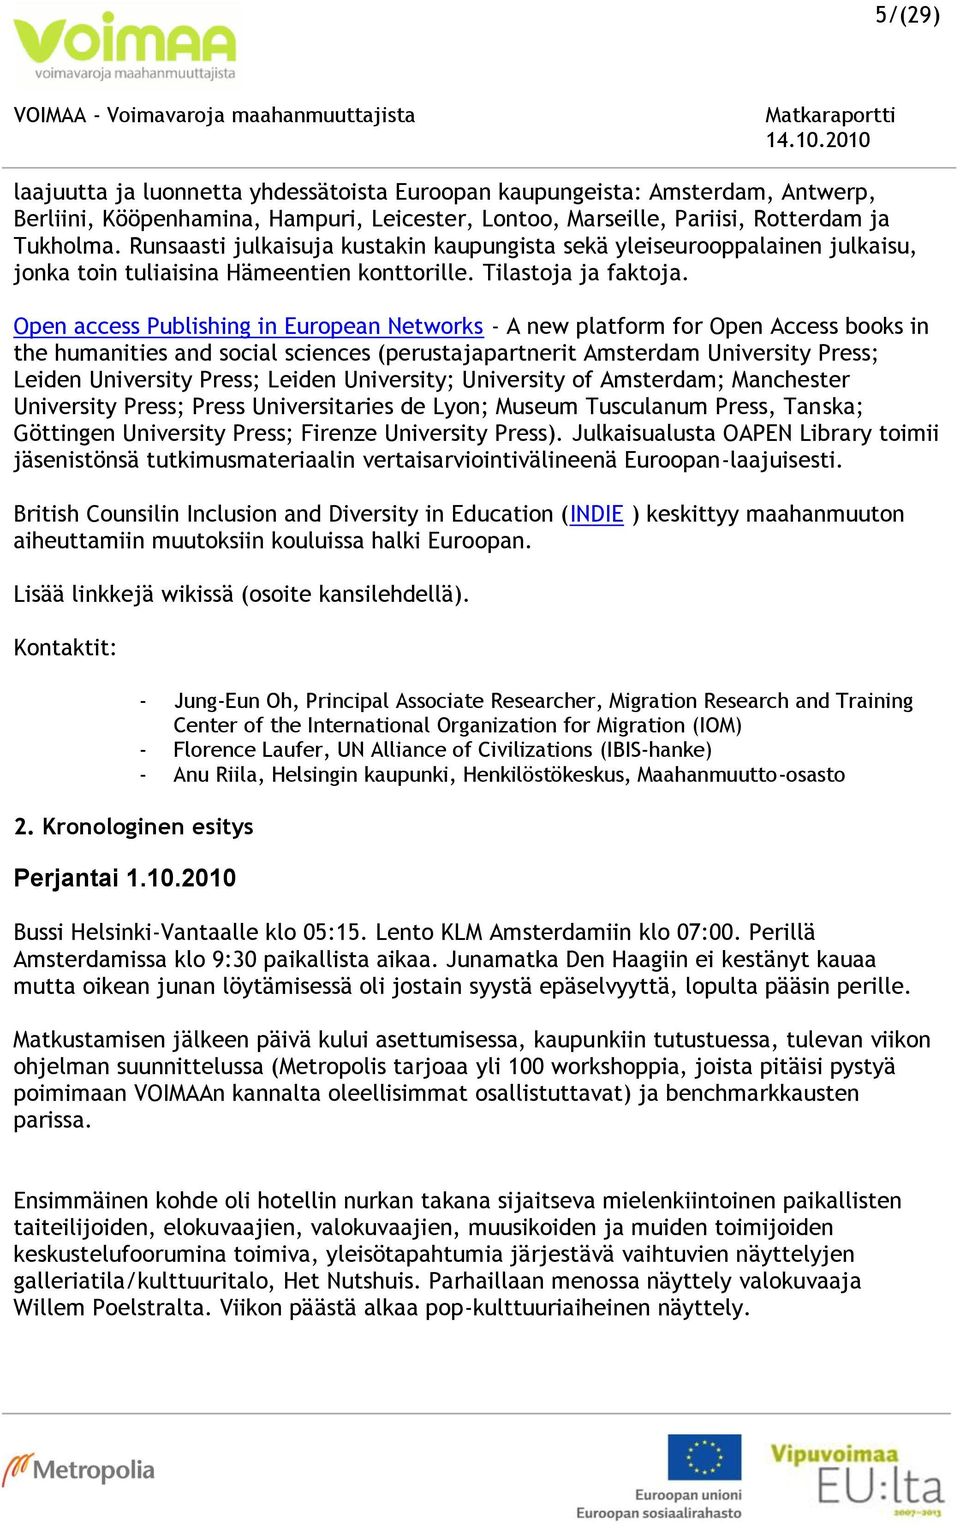 Open access Publishing in European Networks - A new platform for Open Access books in the humanities and social sciences (perustajapartnerit Amsterdam University Press; Leiden University Press;